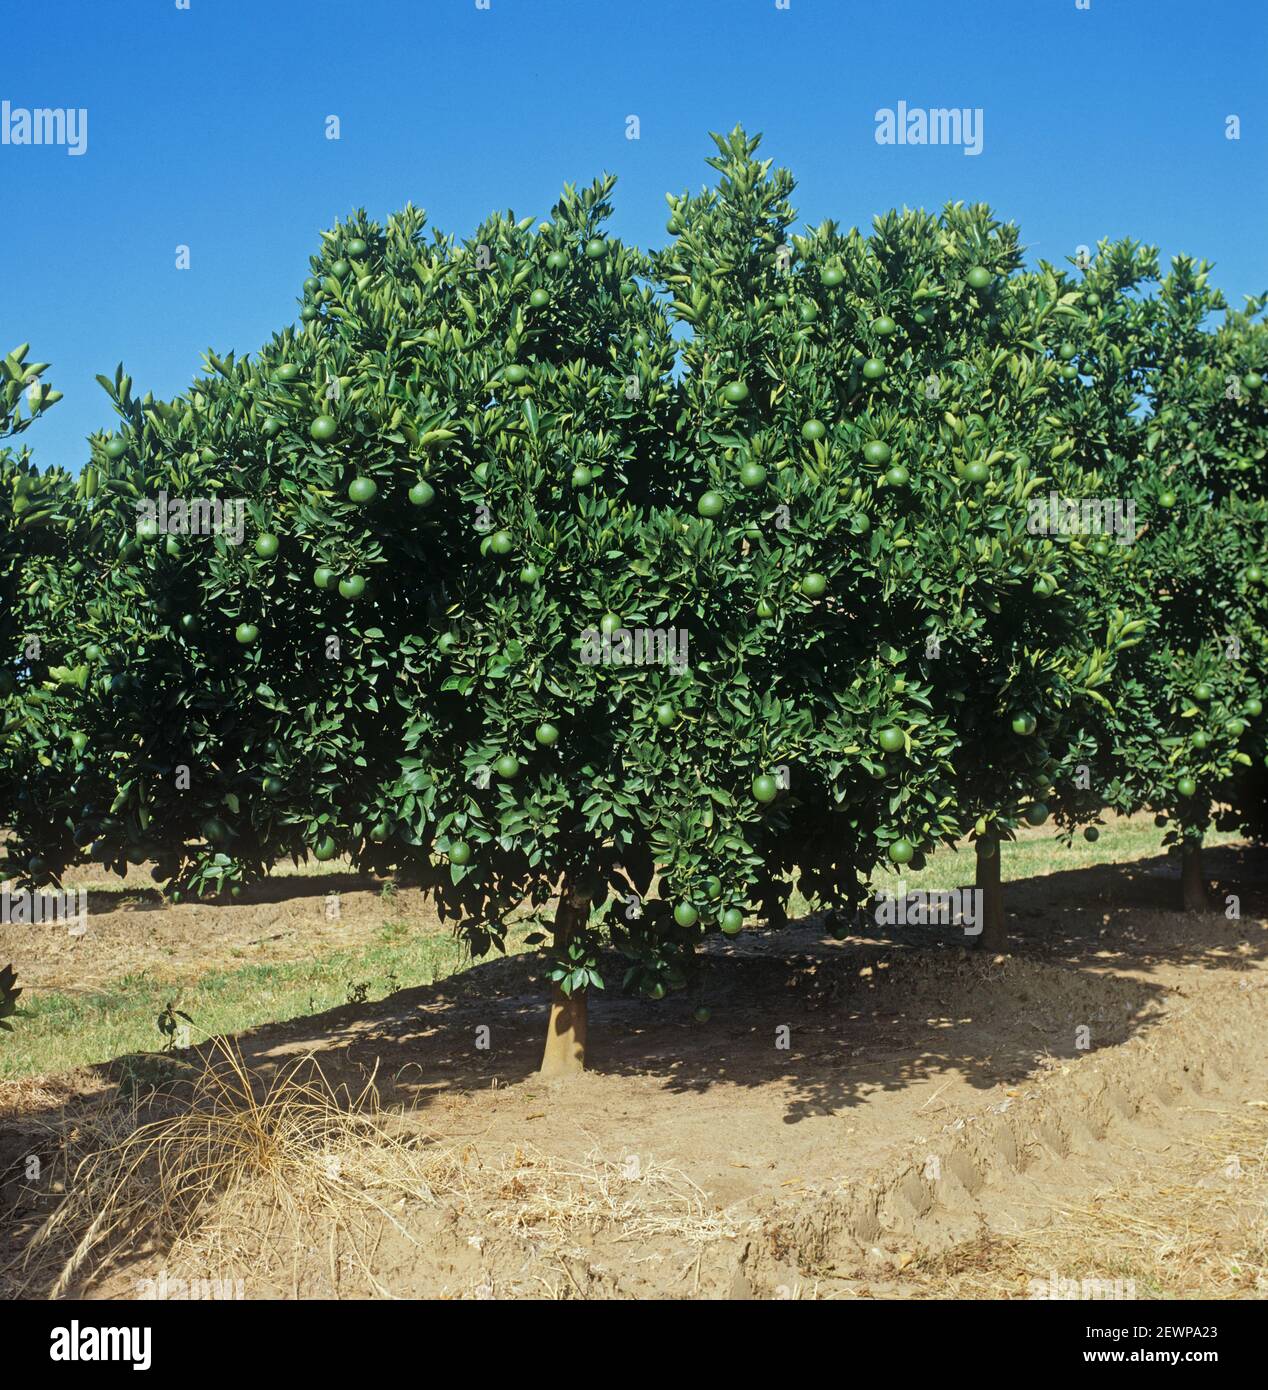 Rows of orange trees (Citrus sinensis) with green, maturing fruit in an orchard in the Low Veldt, Transvaal, South Africa, February Stock Photo